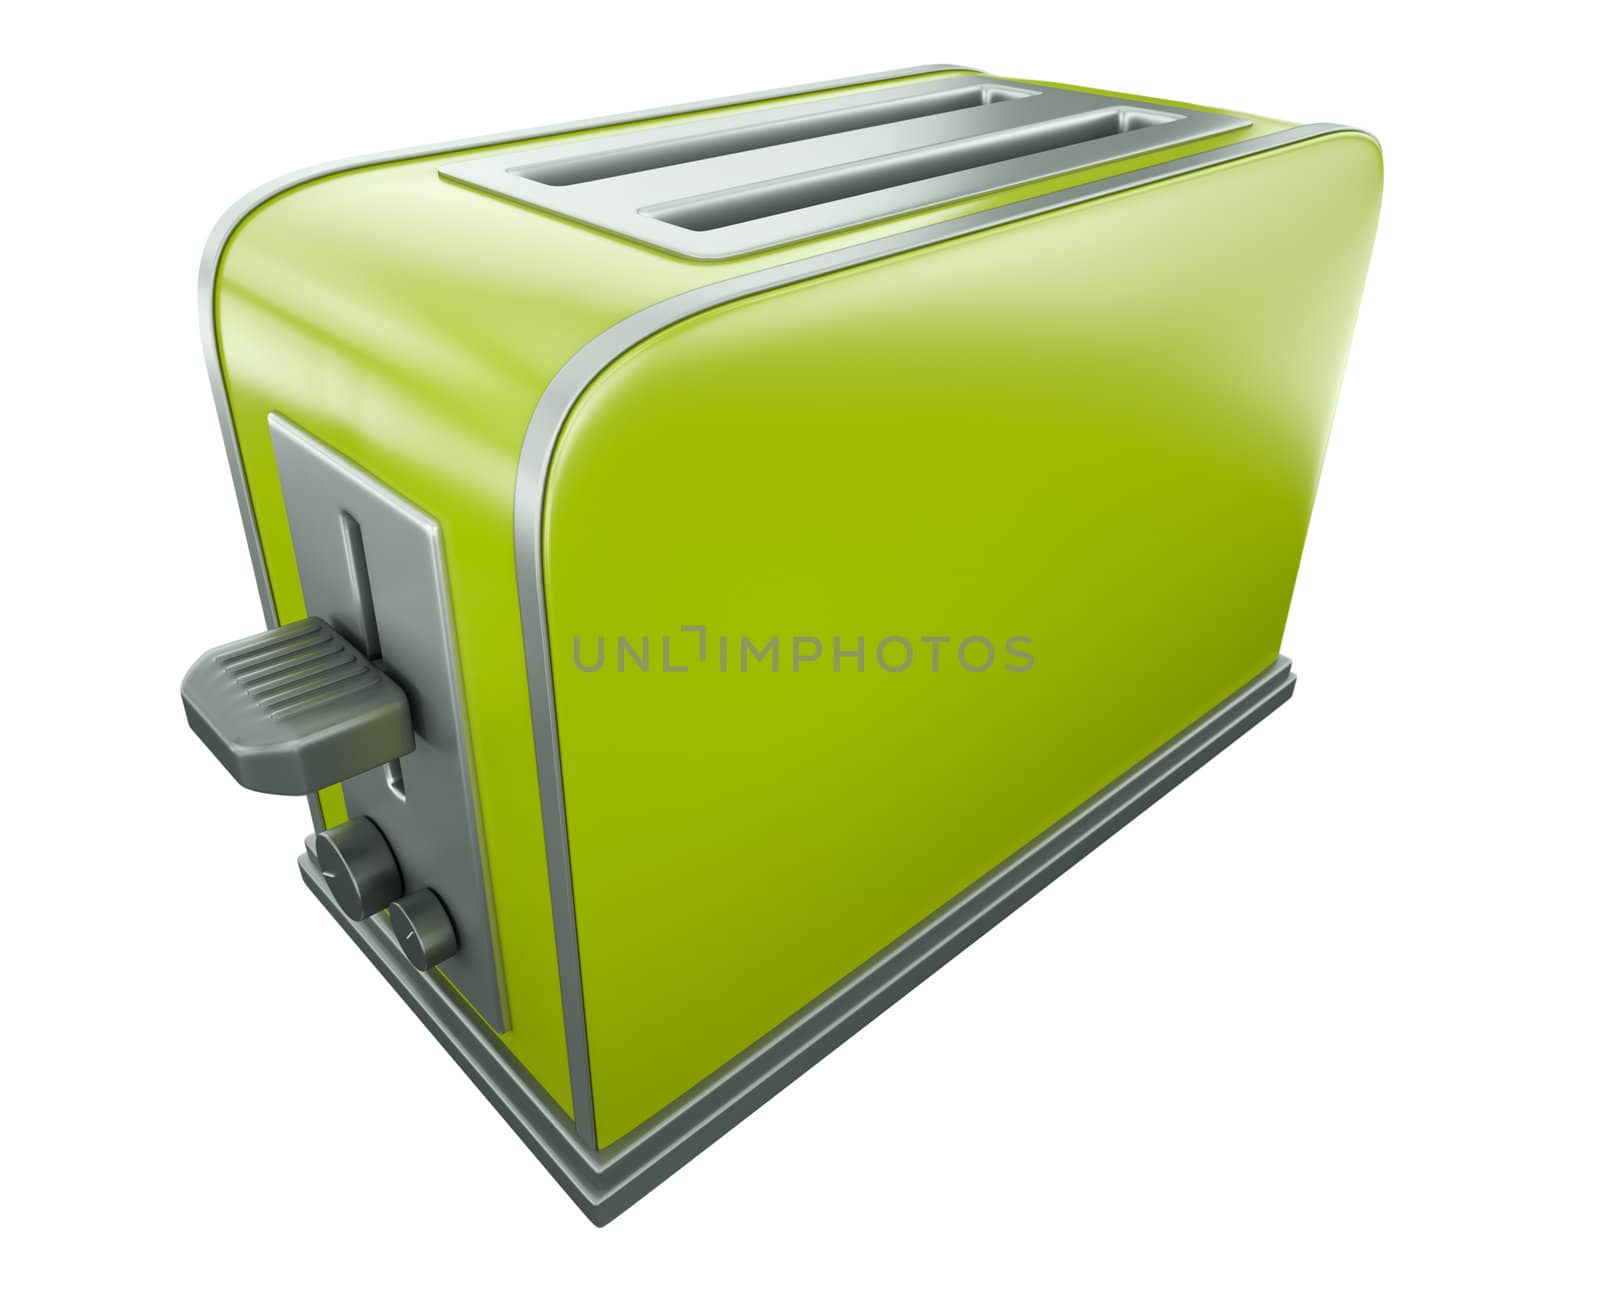 Green toaster. 3D rendered image.